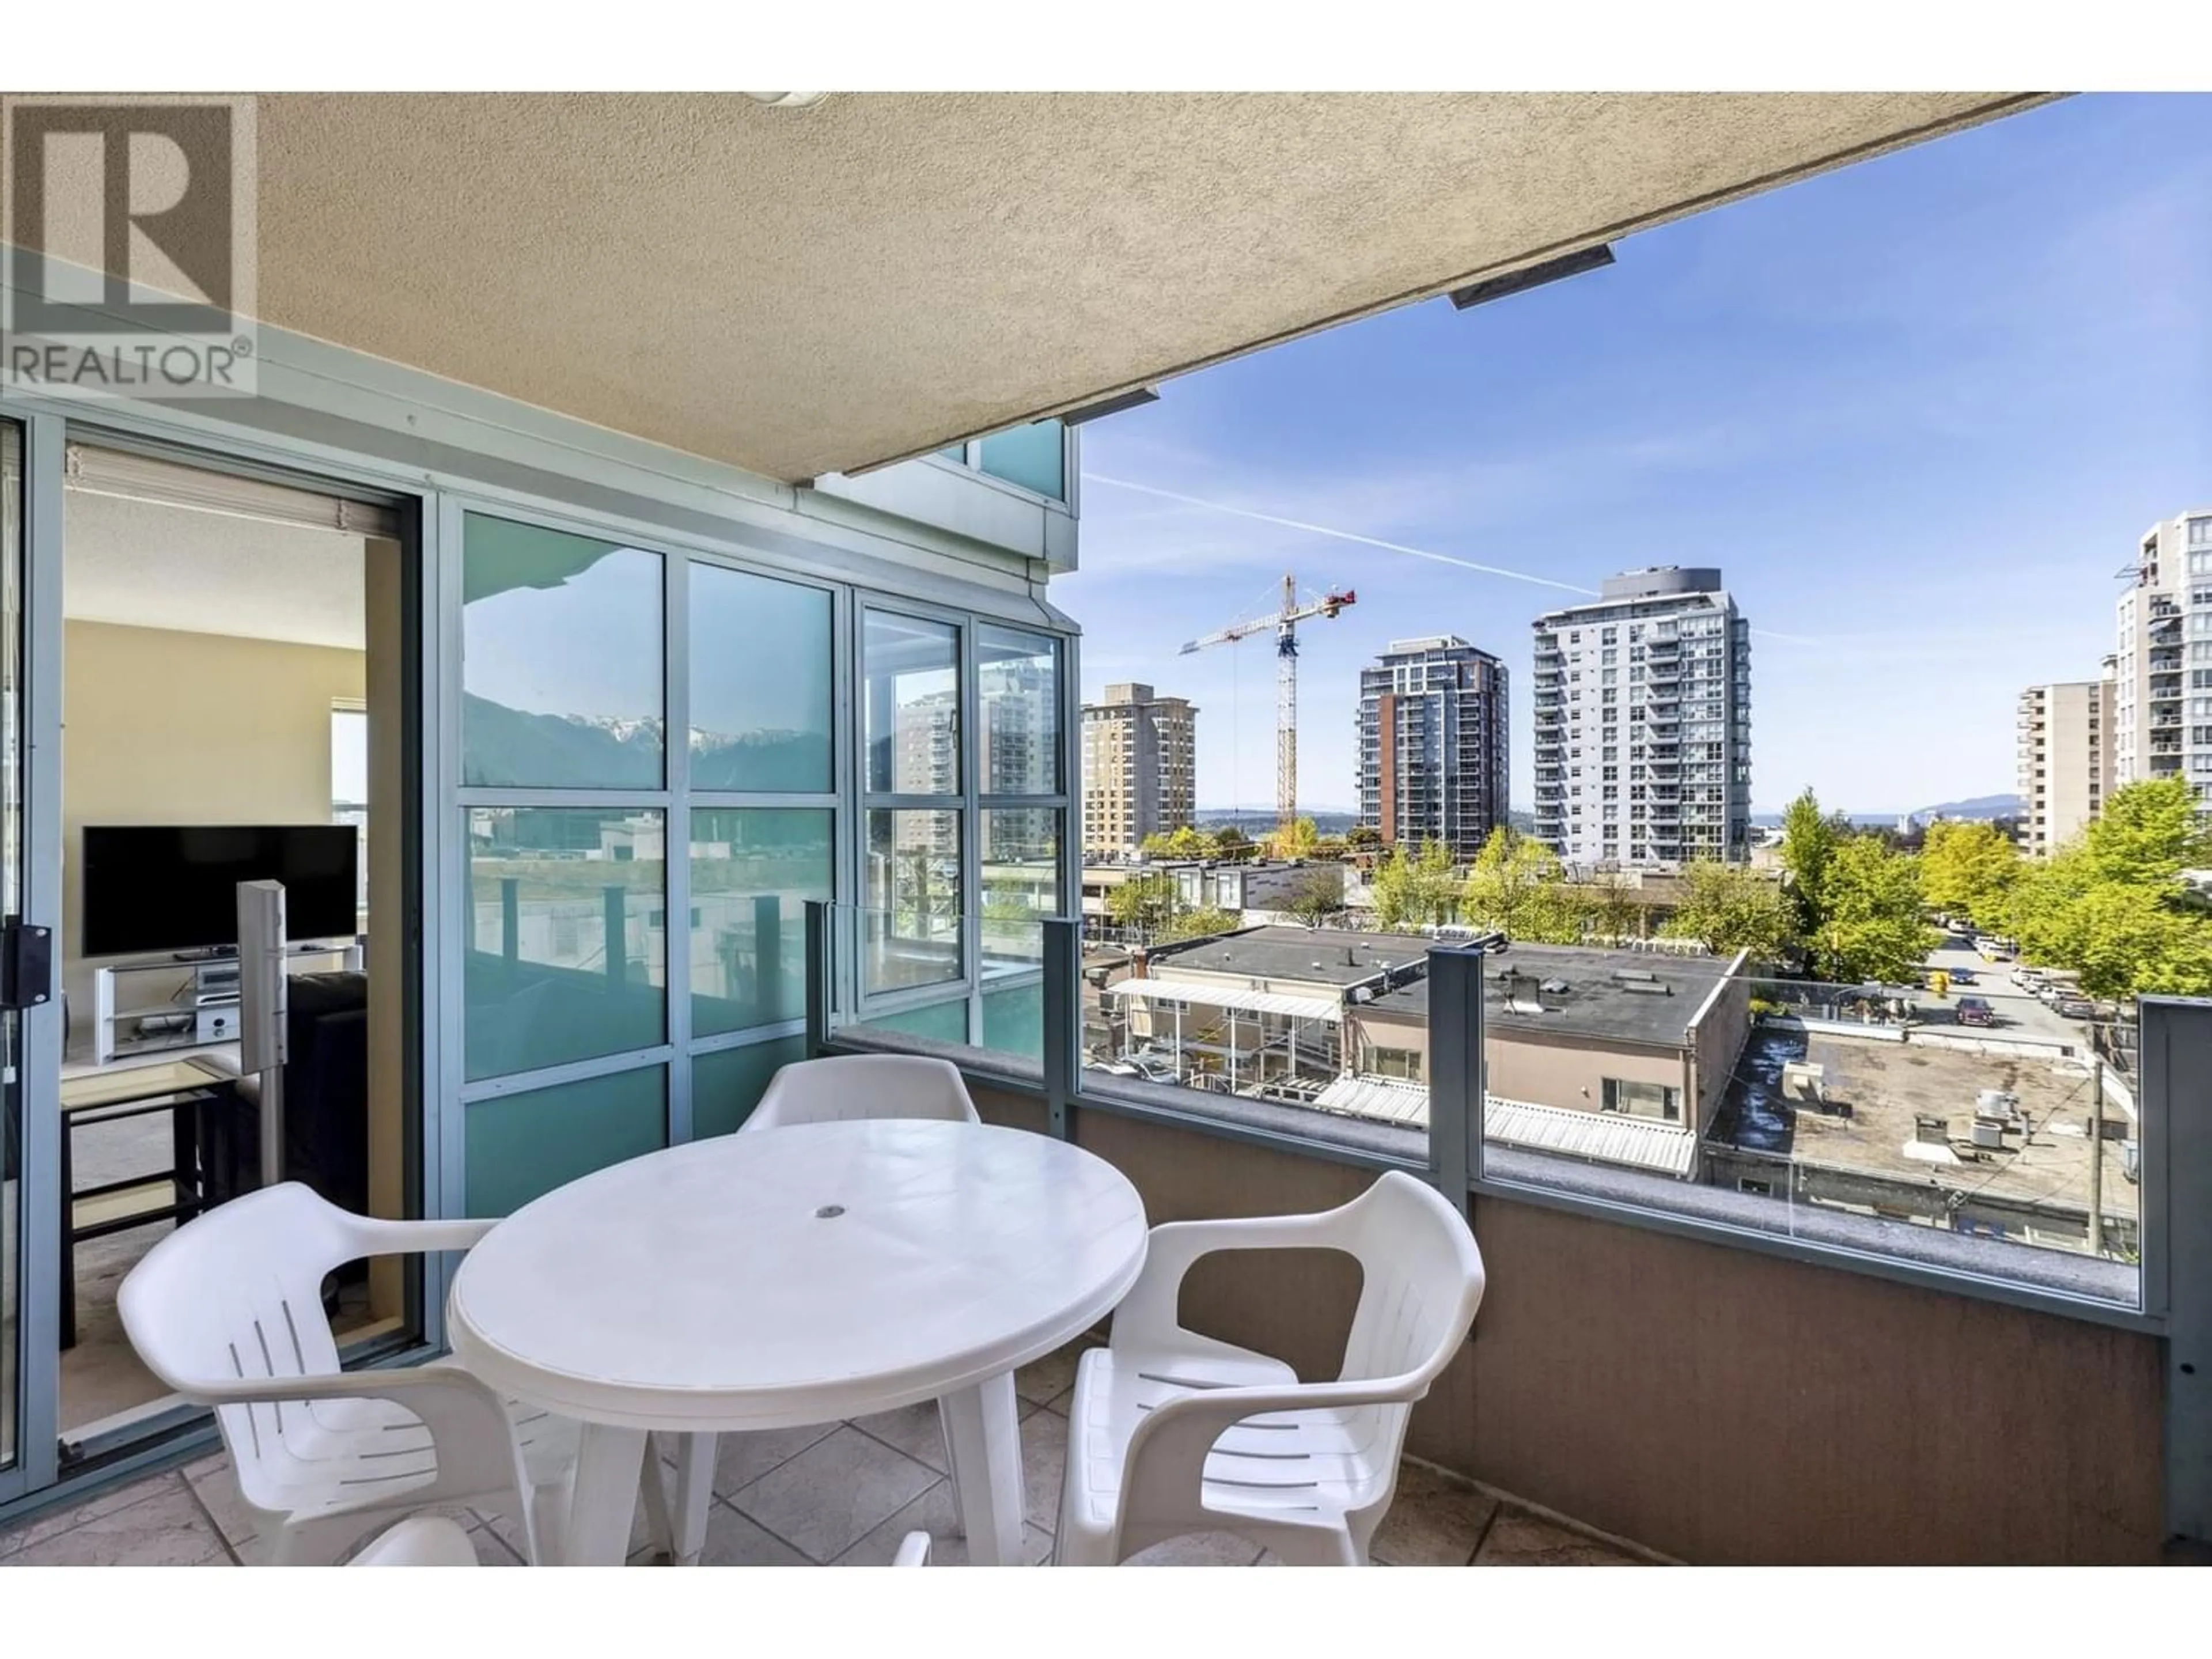 Balcony in the apartment for 504 1555 EASTERN AVENUE, North Vancouver British Columbia V7L3G2